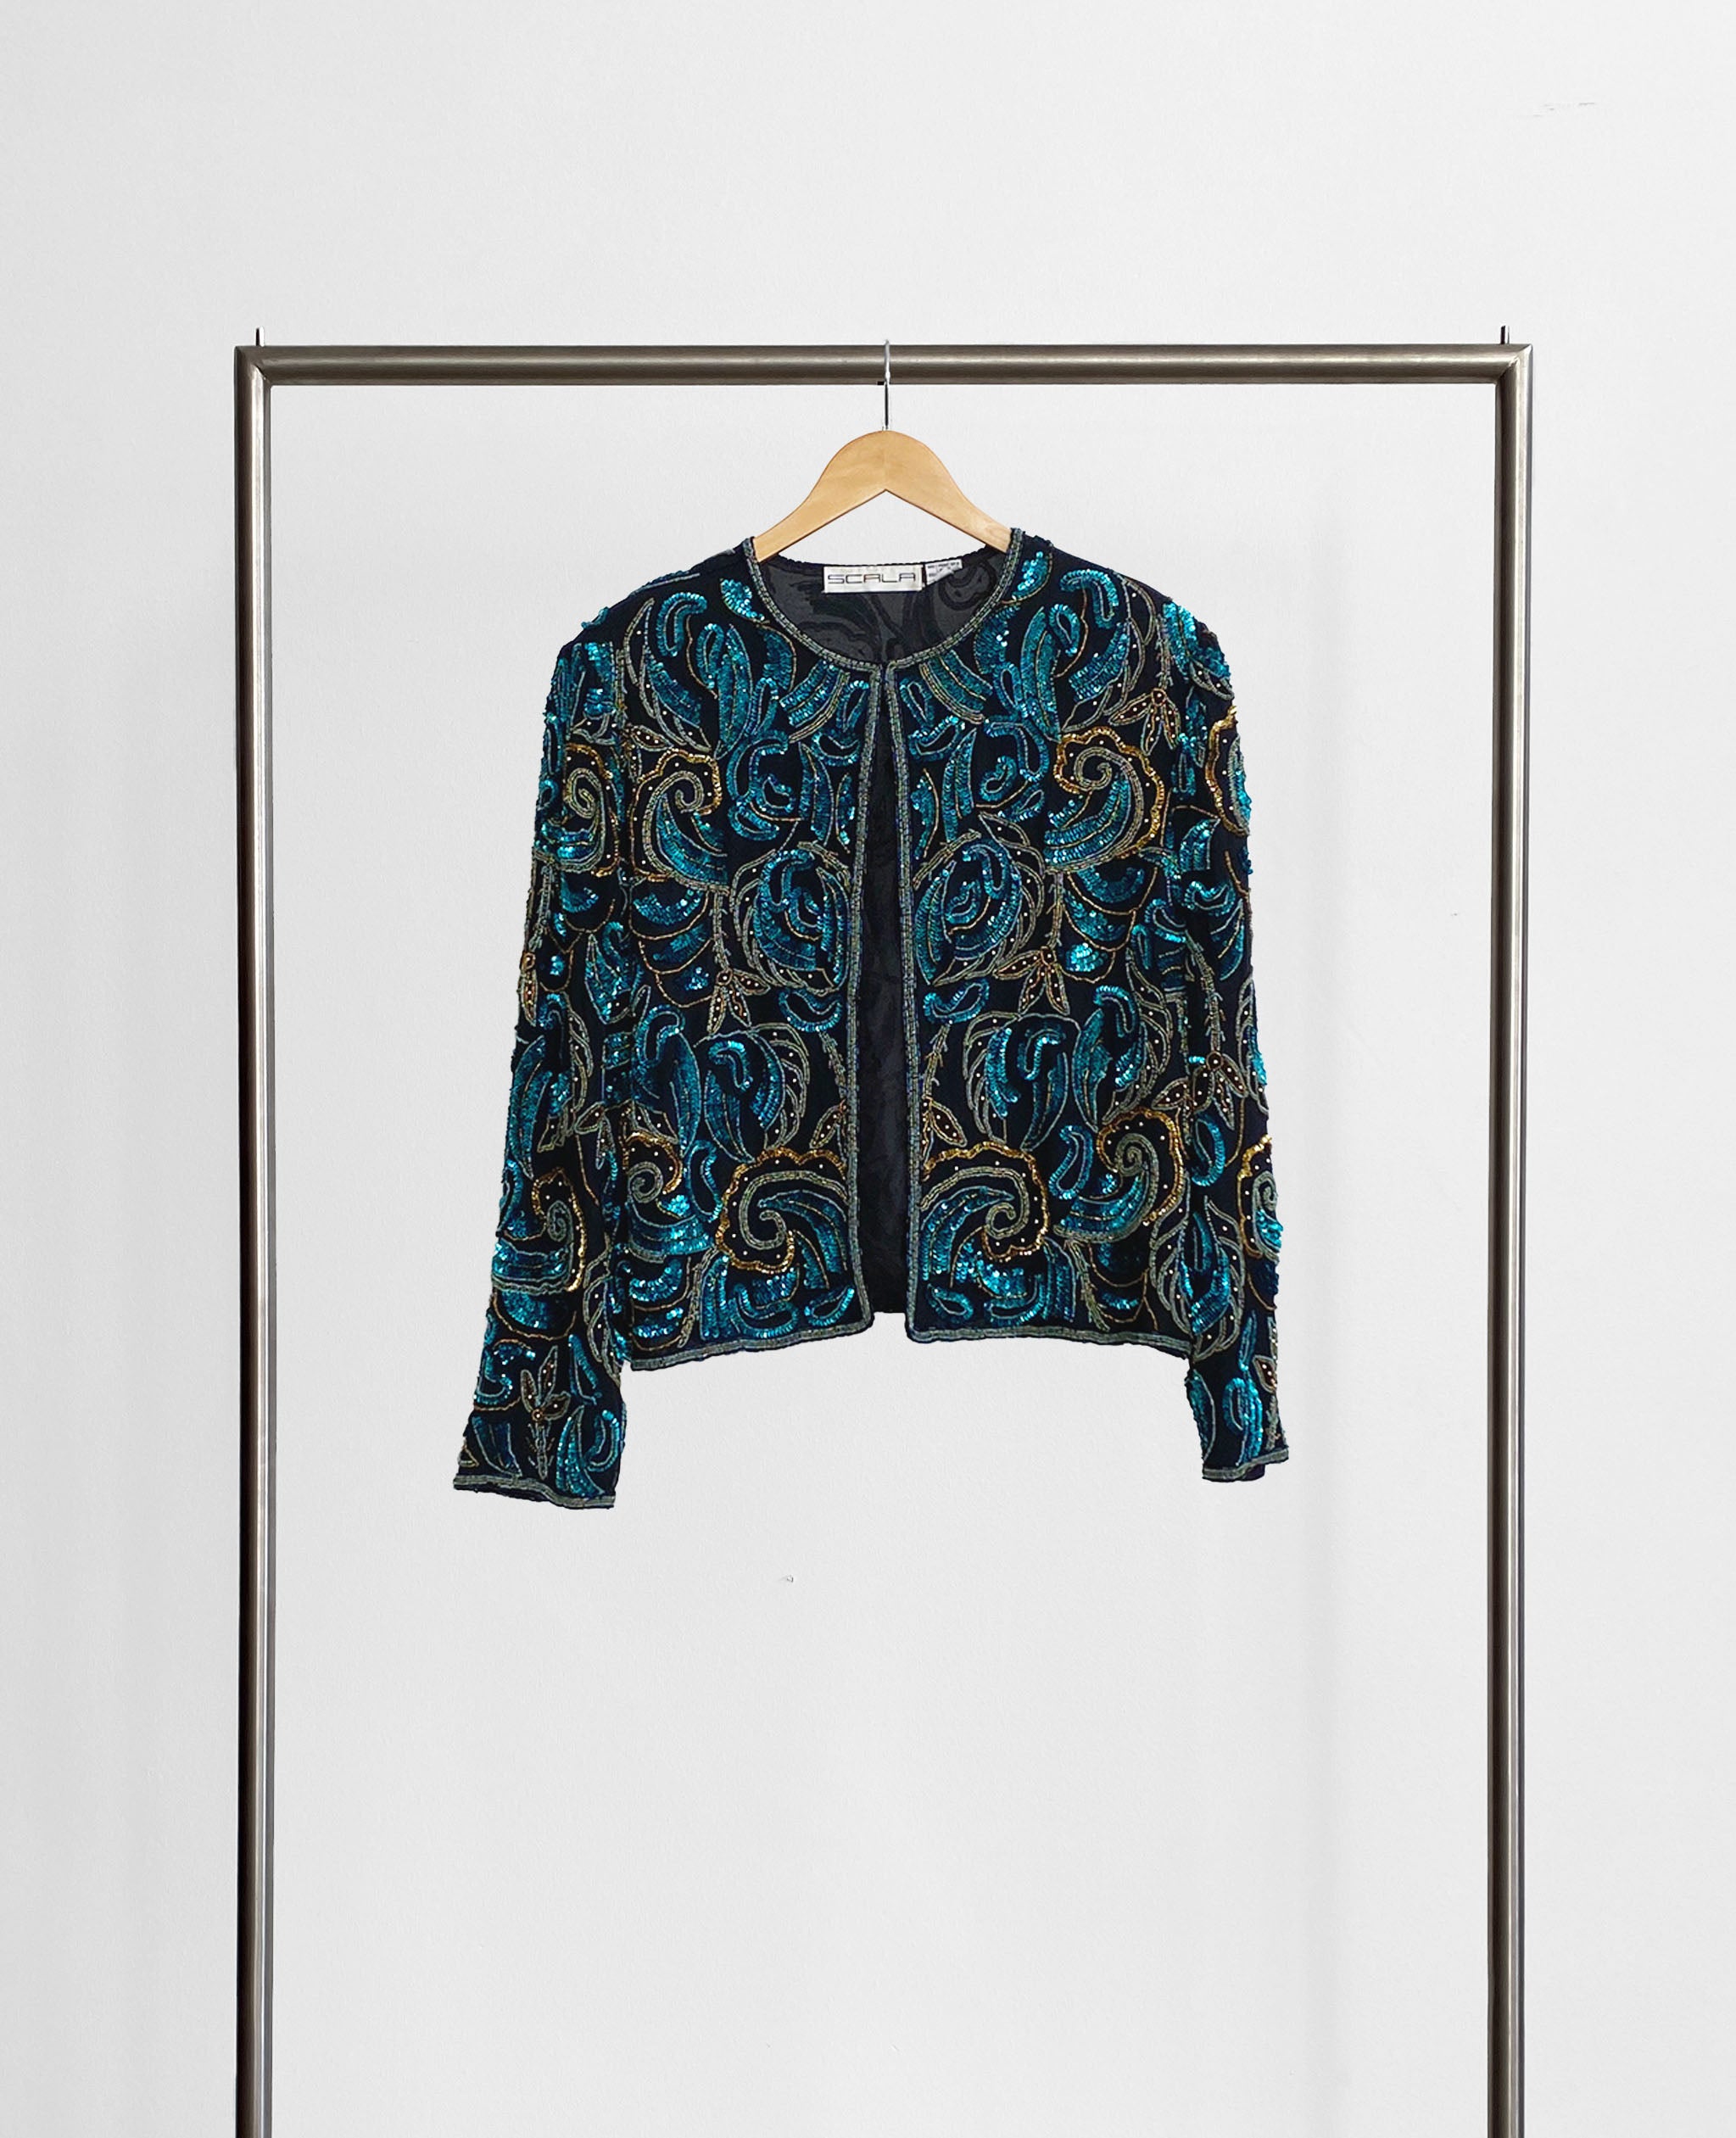 Teal and Gold Patterned Sequin Jacket